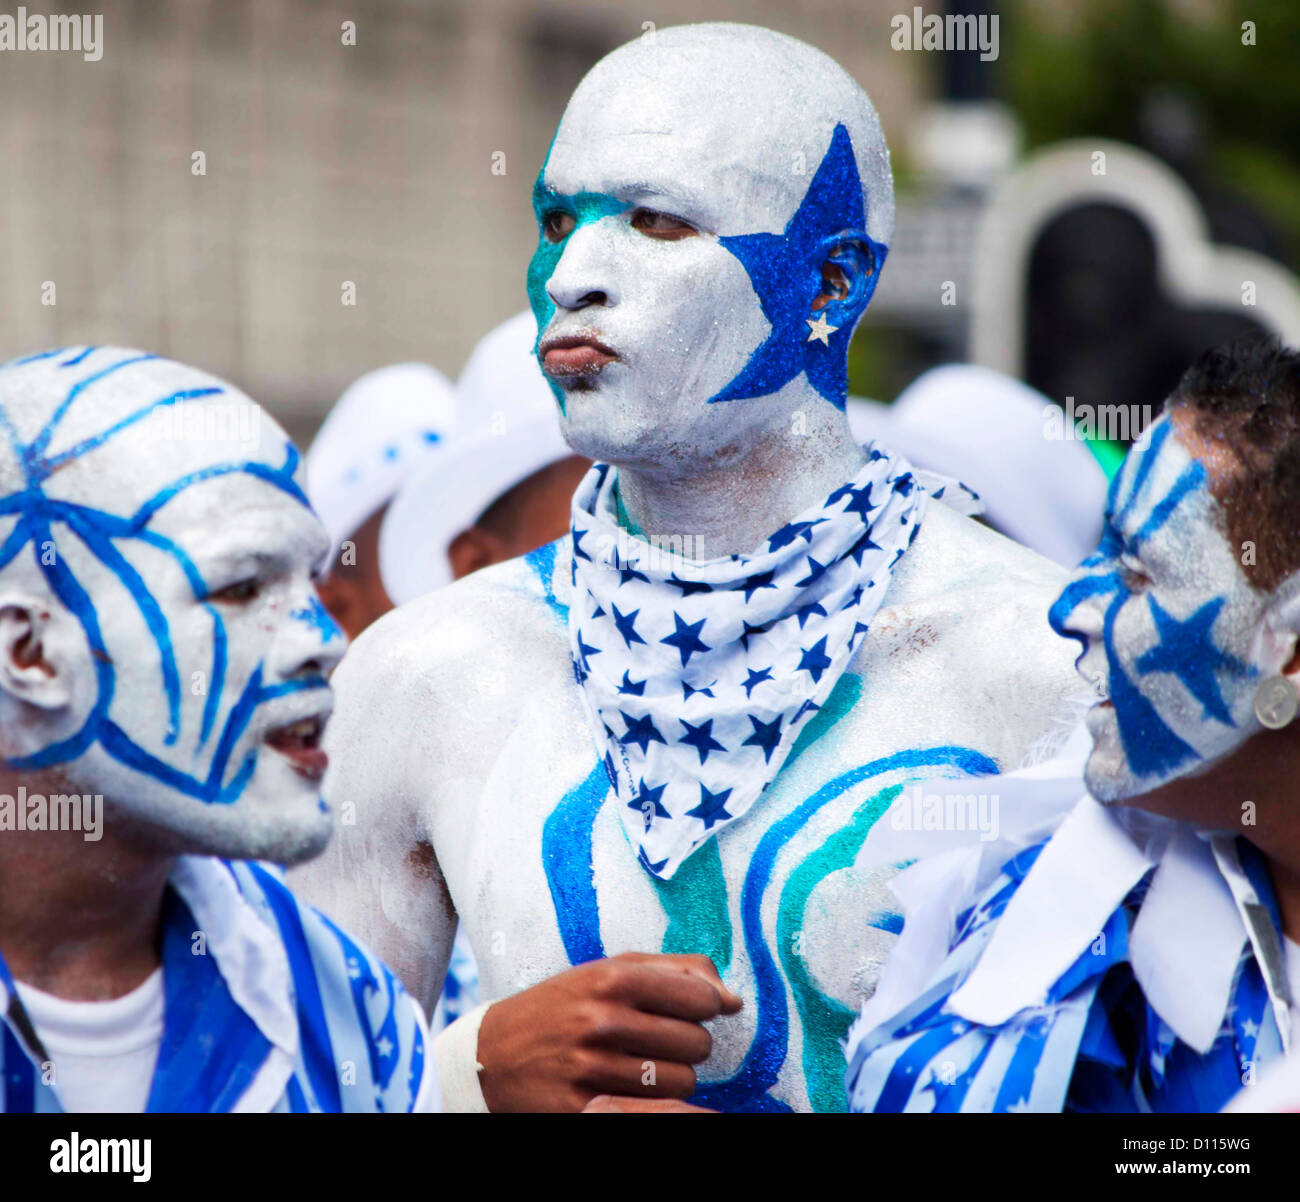 Men in carnival with painted silver and blue stars and stripes. Stock Photo